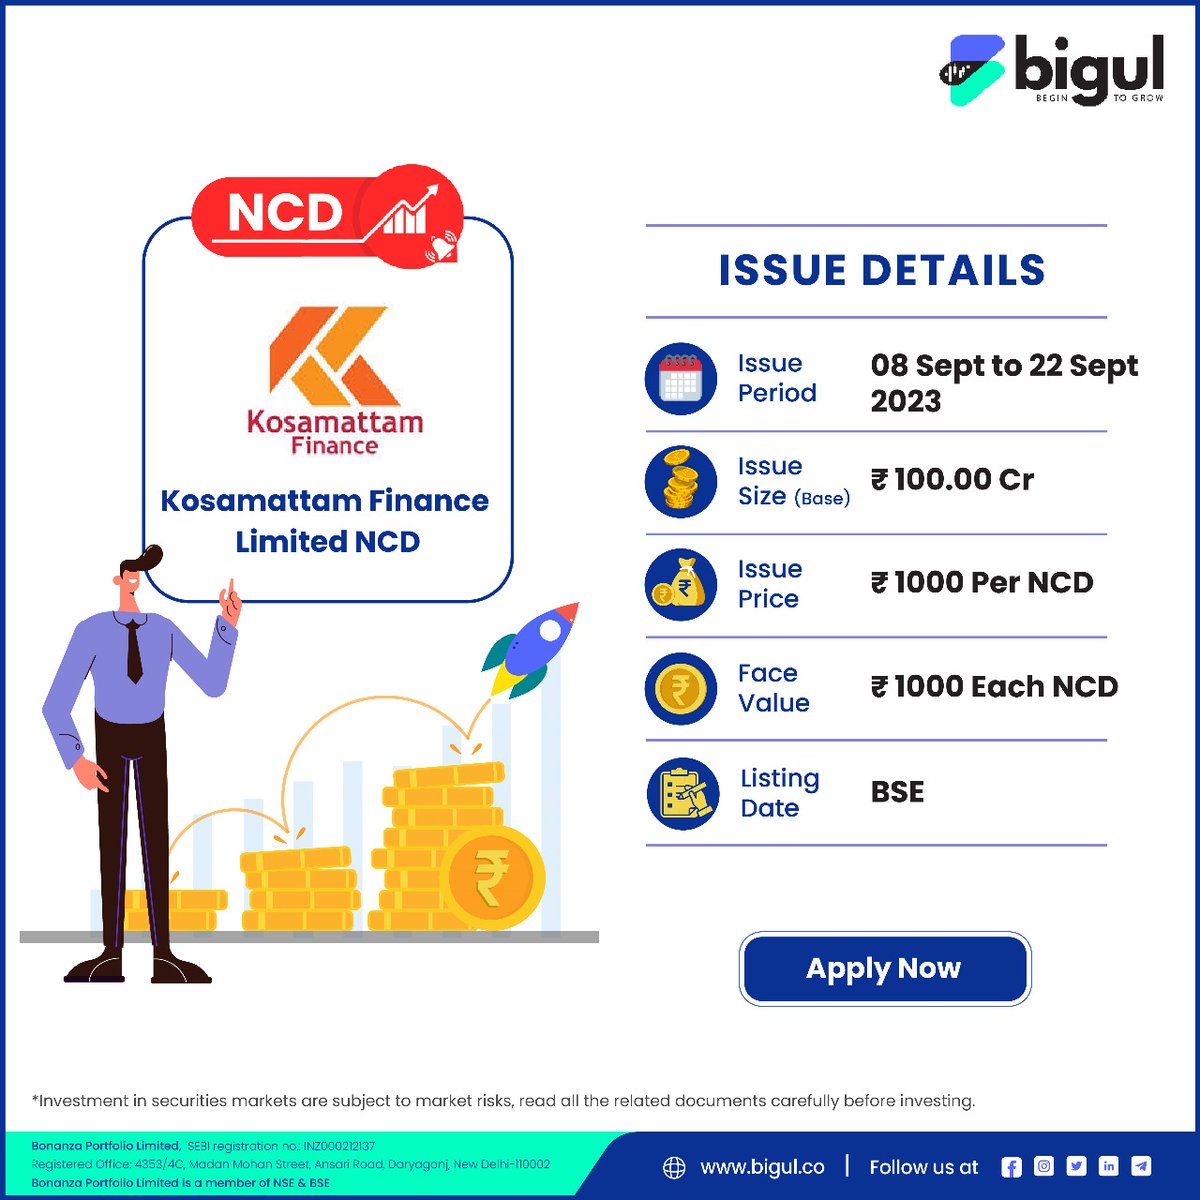 📢Kosamattam Finance introduces Secured, Redeemable, Non-Convertible Debentures. 📅Subscription window open from Sep 8 to Sep 22. 
Check more details👇
bit.ly/462DifU

#KosamattamFinance #NCD #Finance #Banking #GoldLoan #NBFC